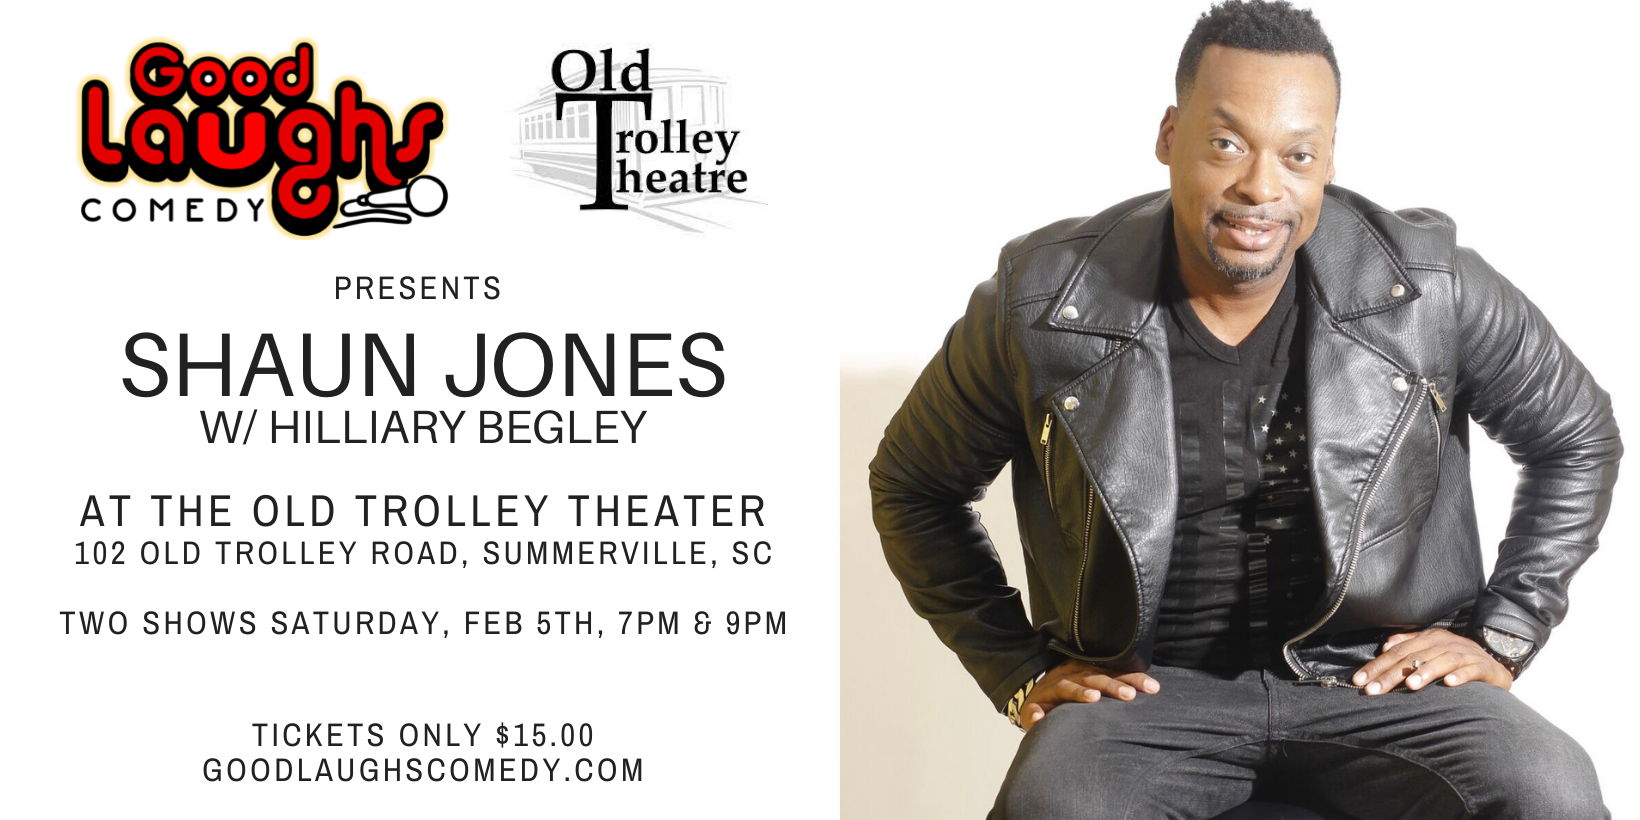 Shaun Jones and Hilliary Begley at Old Trolley Theatre promotional image